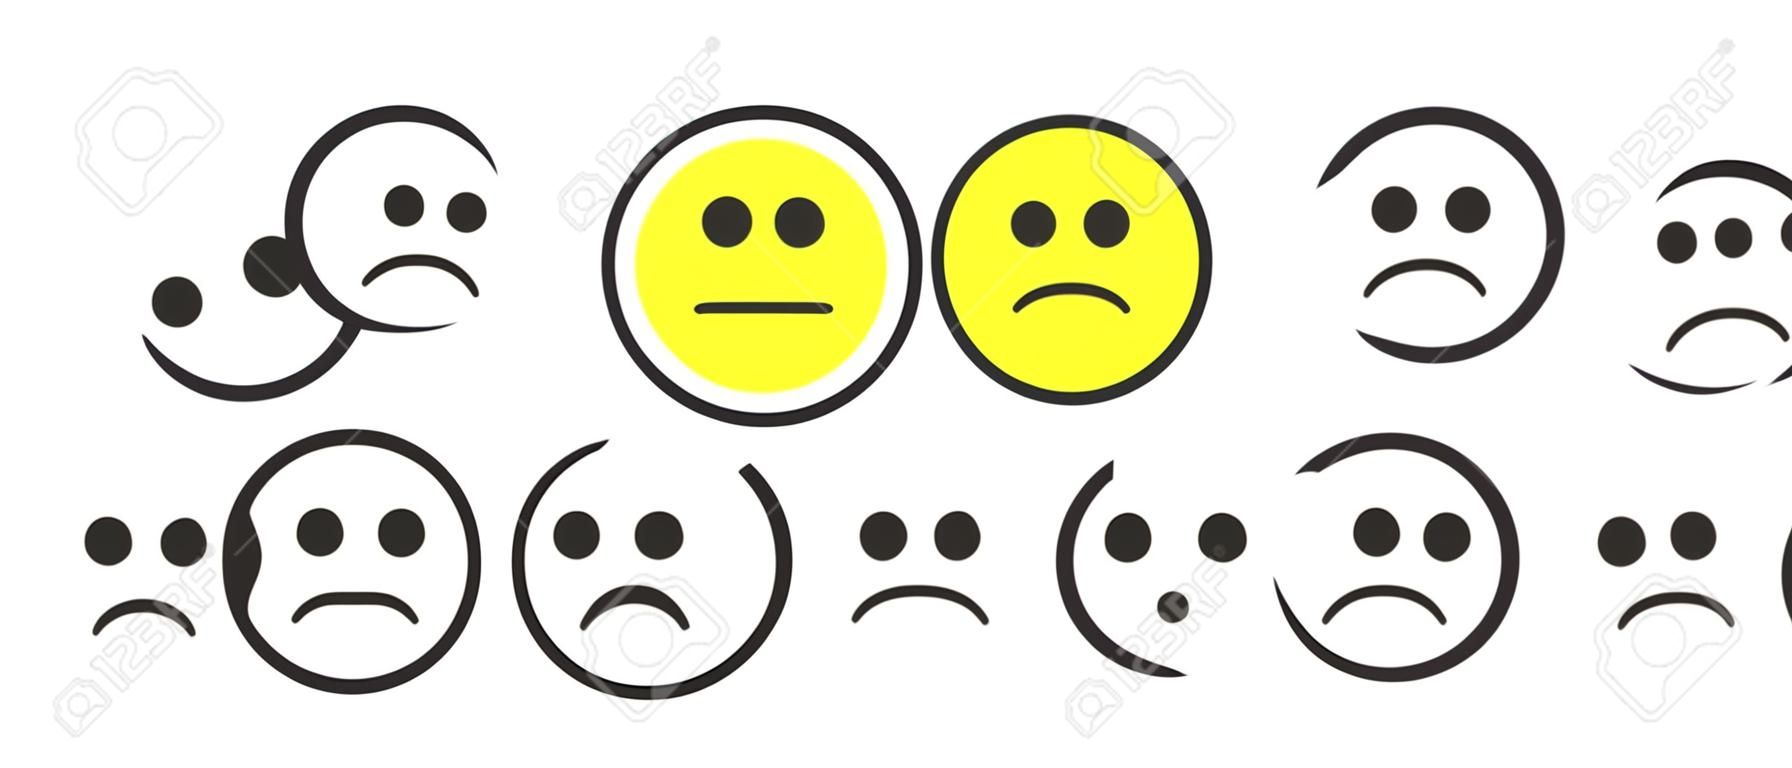 Rating satisfaction. Feedback in form of monochrome and colorful emotions, smileys, emojis. Excellent, good, normal, bad, awful, silent. Vector